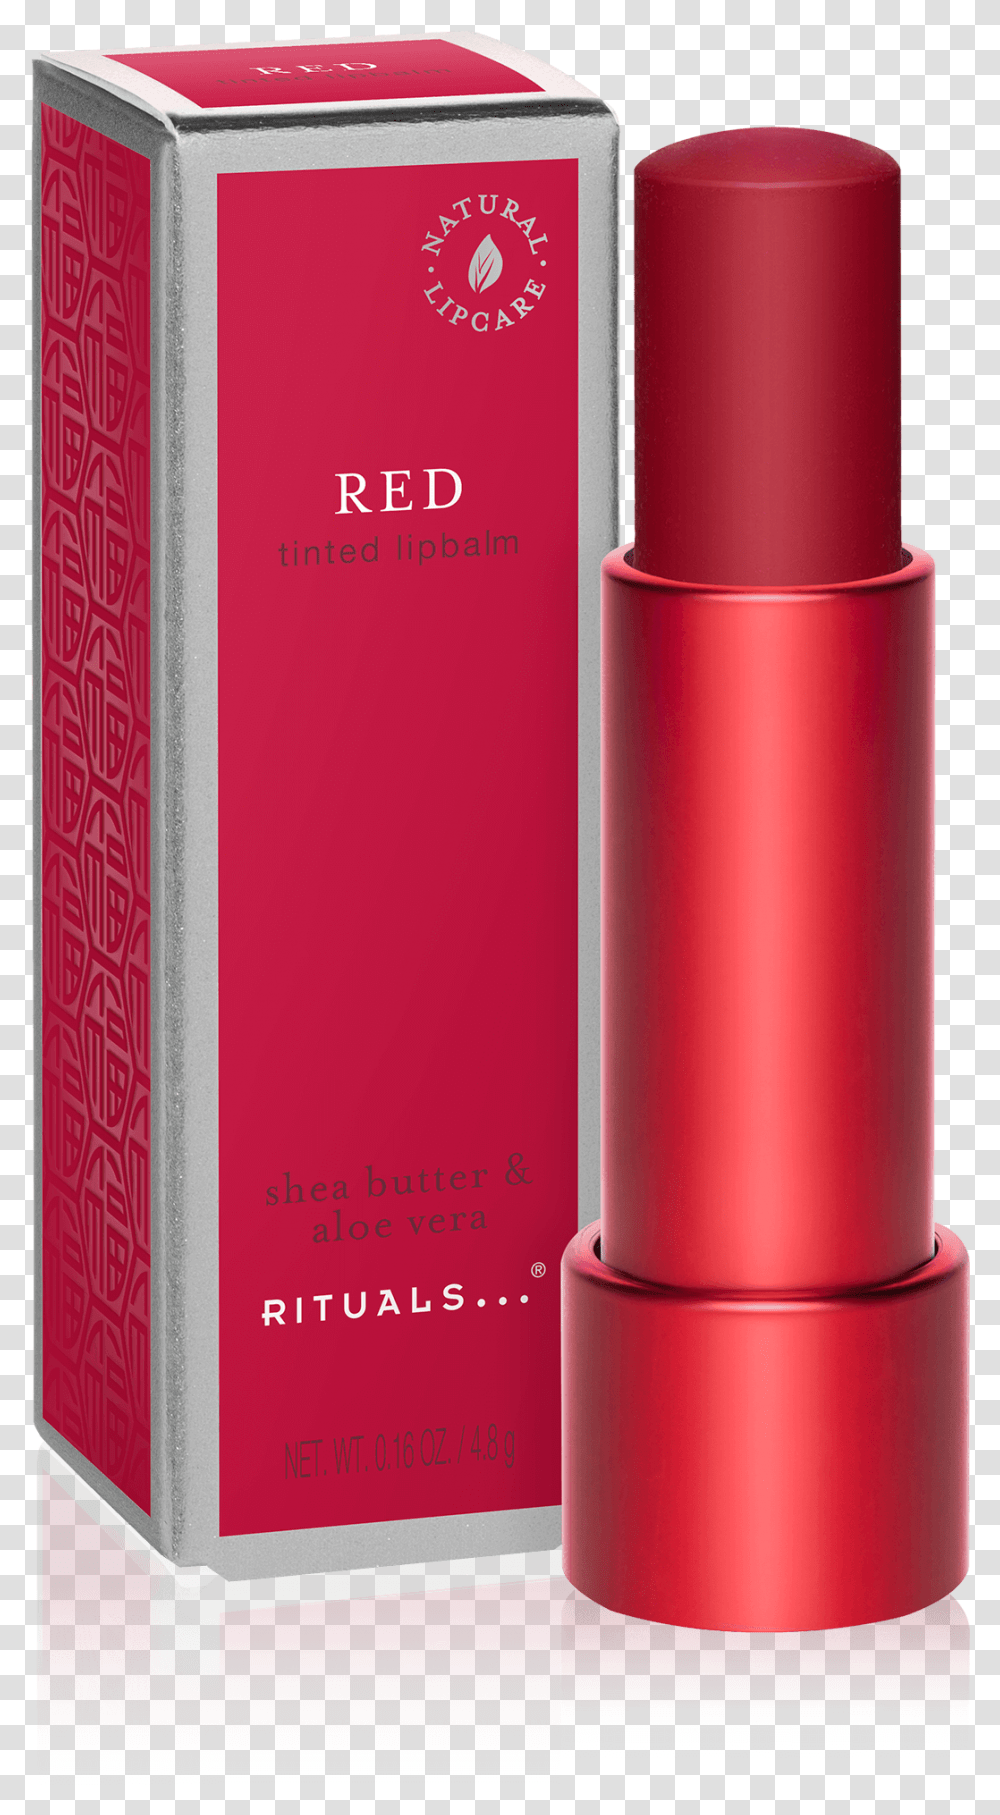 Fortune Balms Red Rituals Fortune Balm Pink, Cosmetics, Lipstick Transparent Png